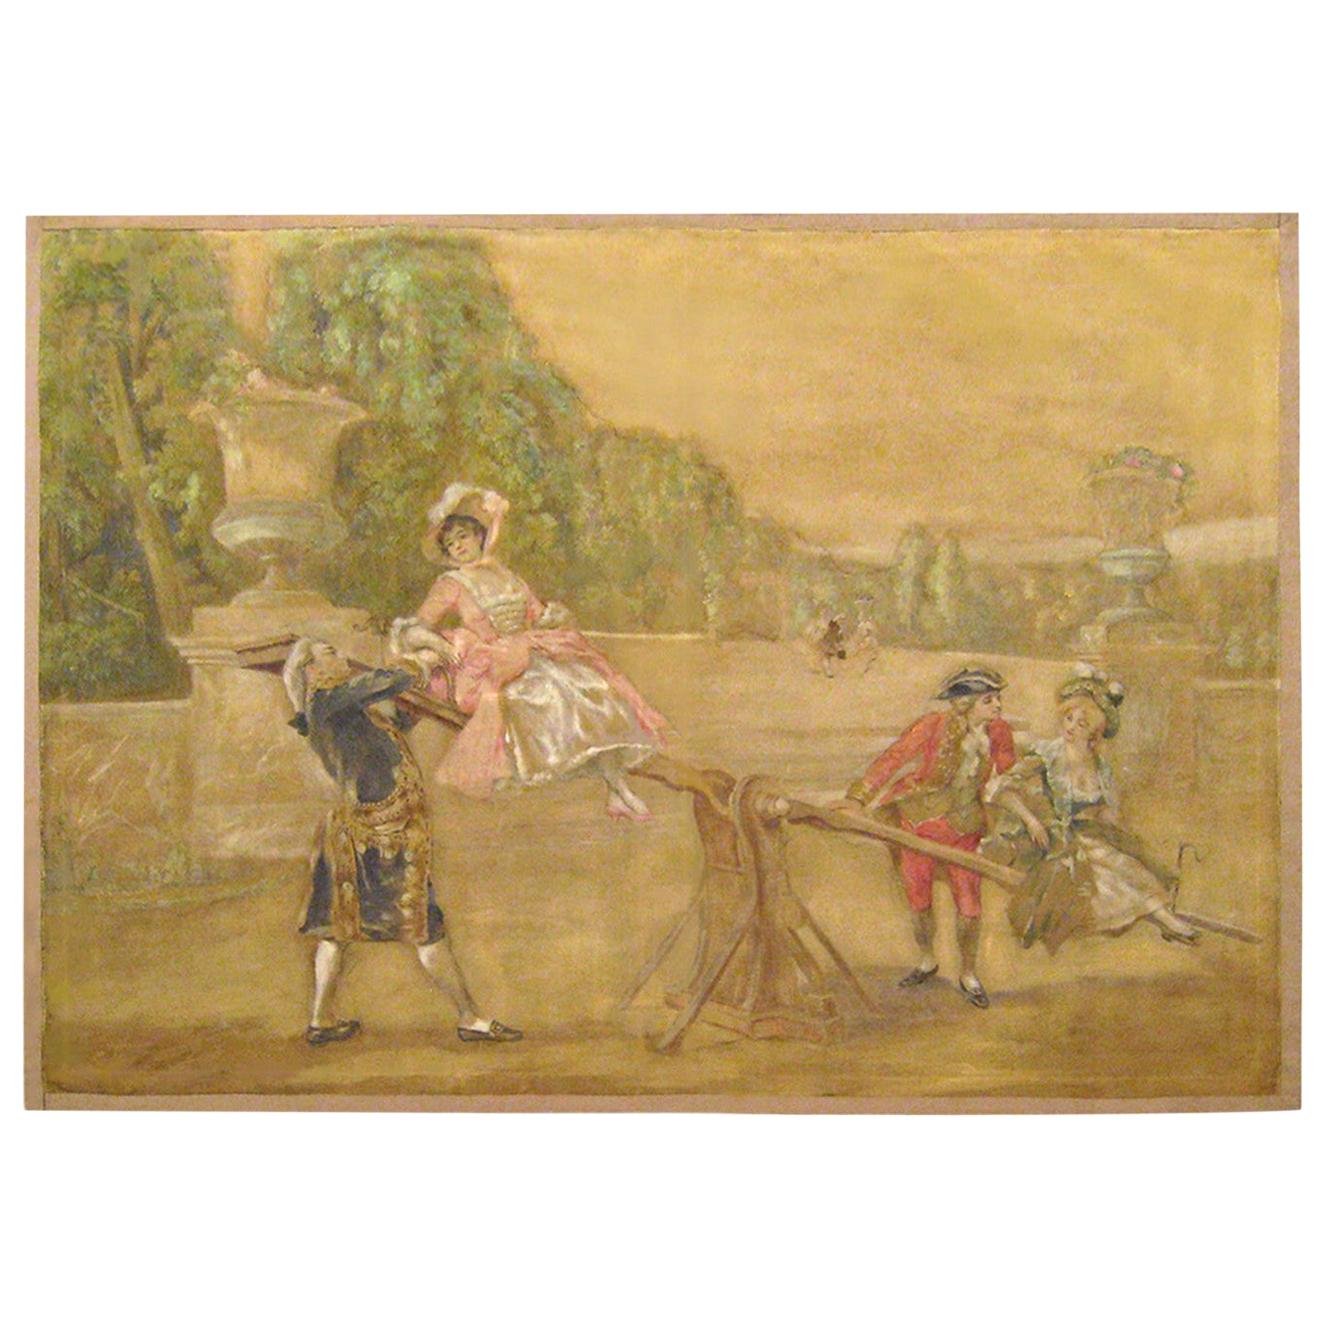 19th Century French Rustic Tapestry Cartoon, Depicting Youths at Play